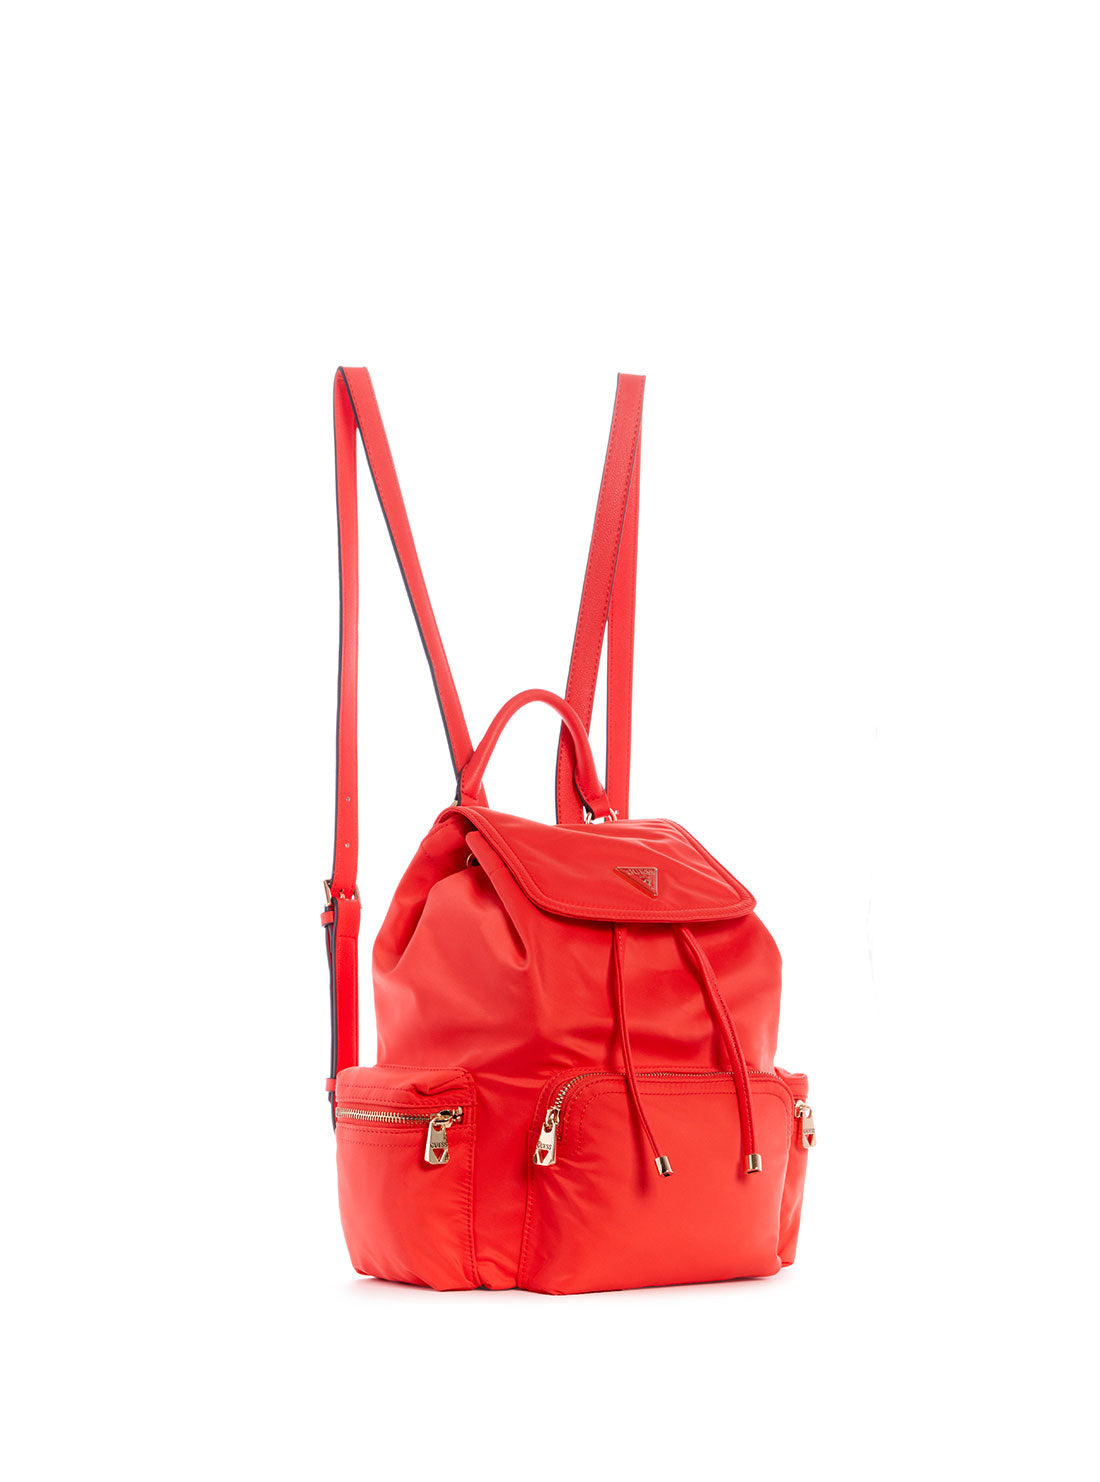 GUESS Women's Eco Red Gemma Backpack EYG839532 Front Side View